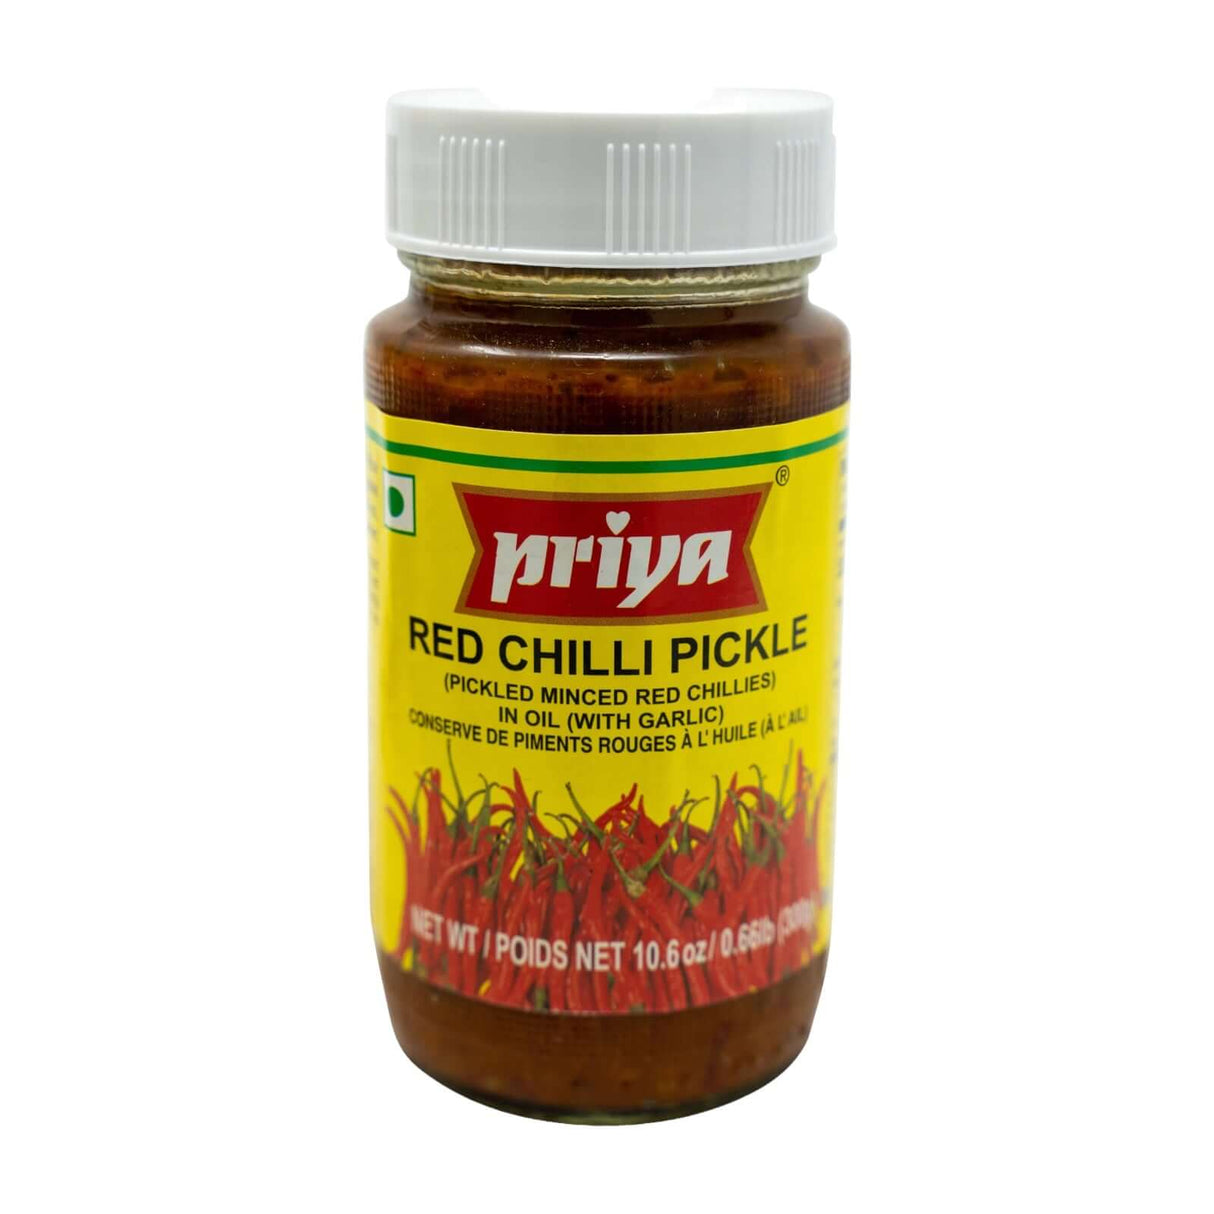 Priya Red Chile Pickle in Oil (with Garlic)